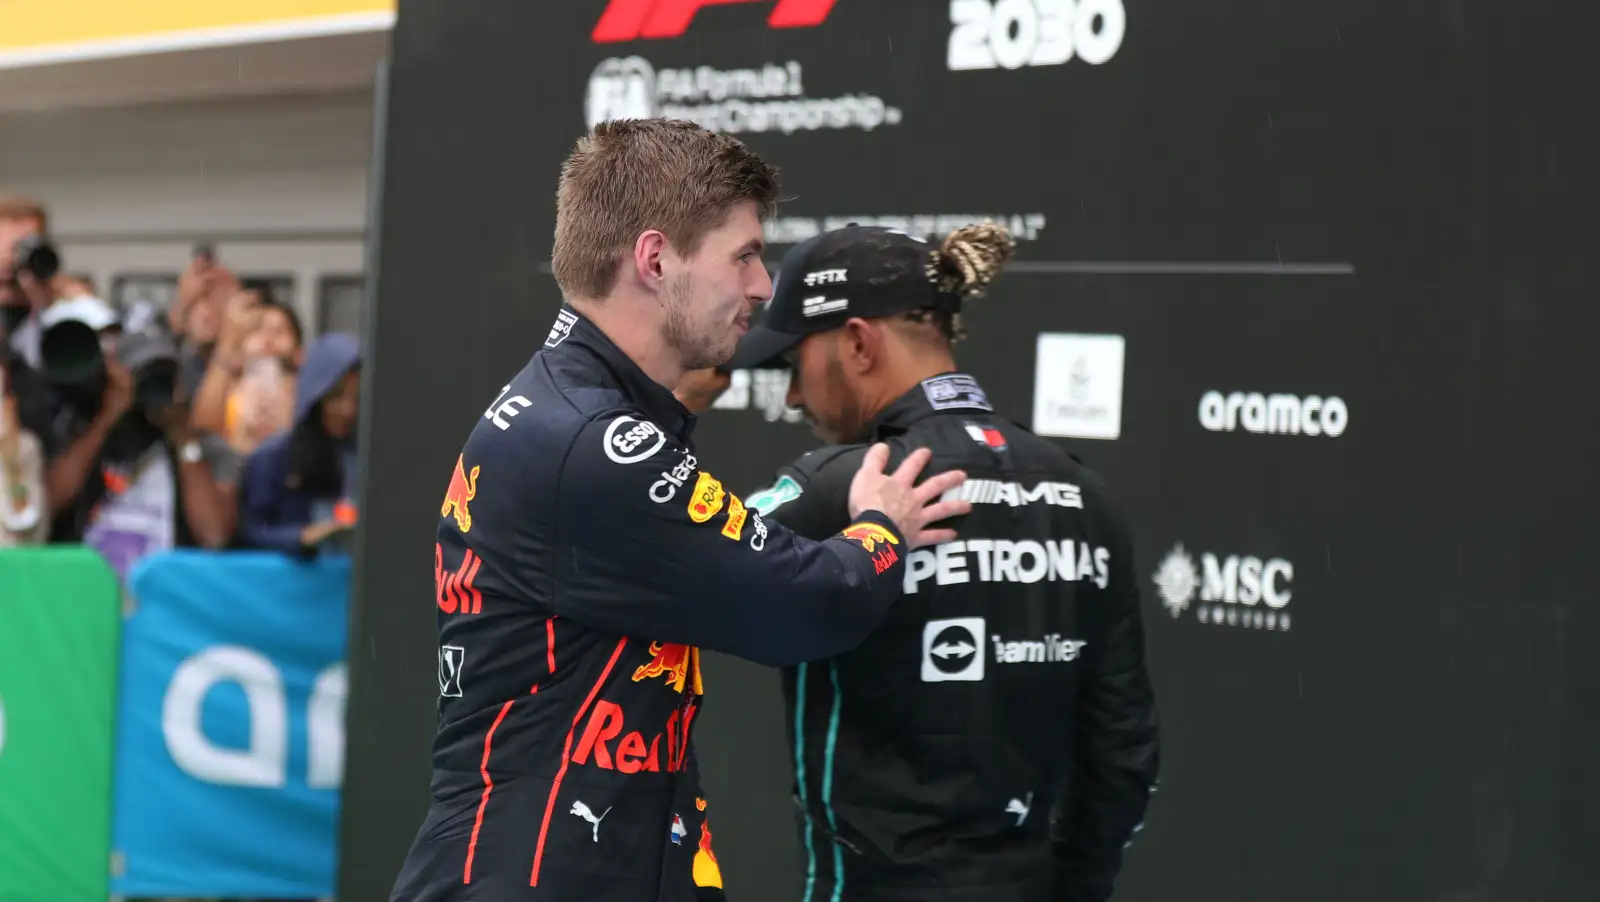 Max Verstappen pats Lewis Hamilton on the back. Hungary July 2022